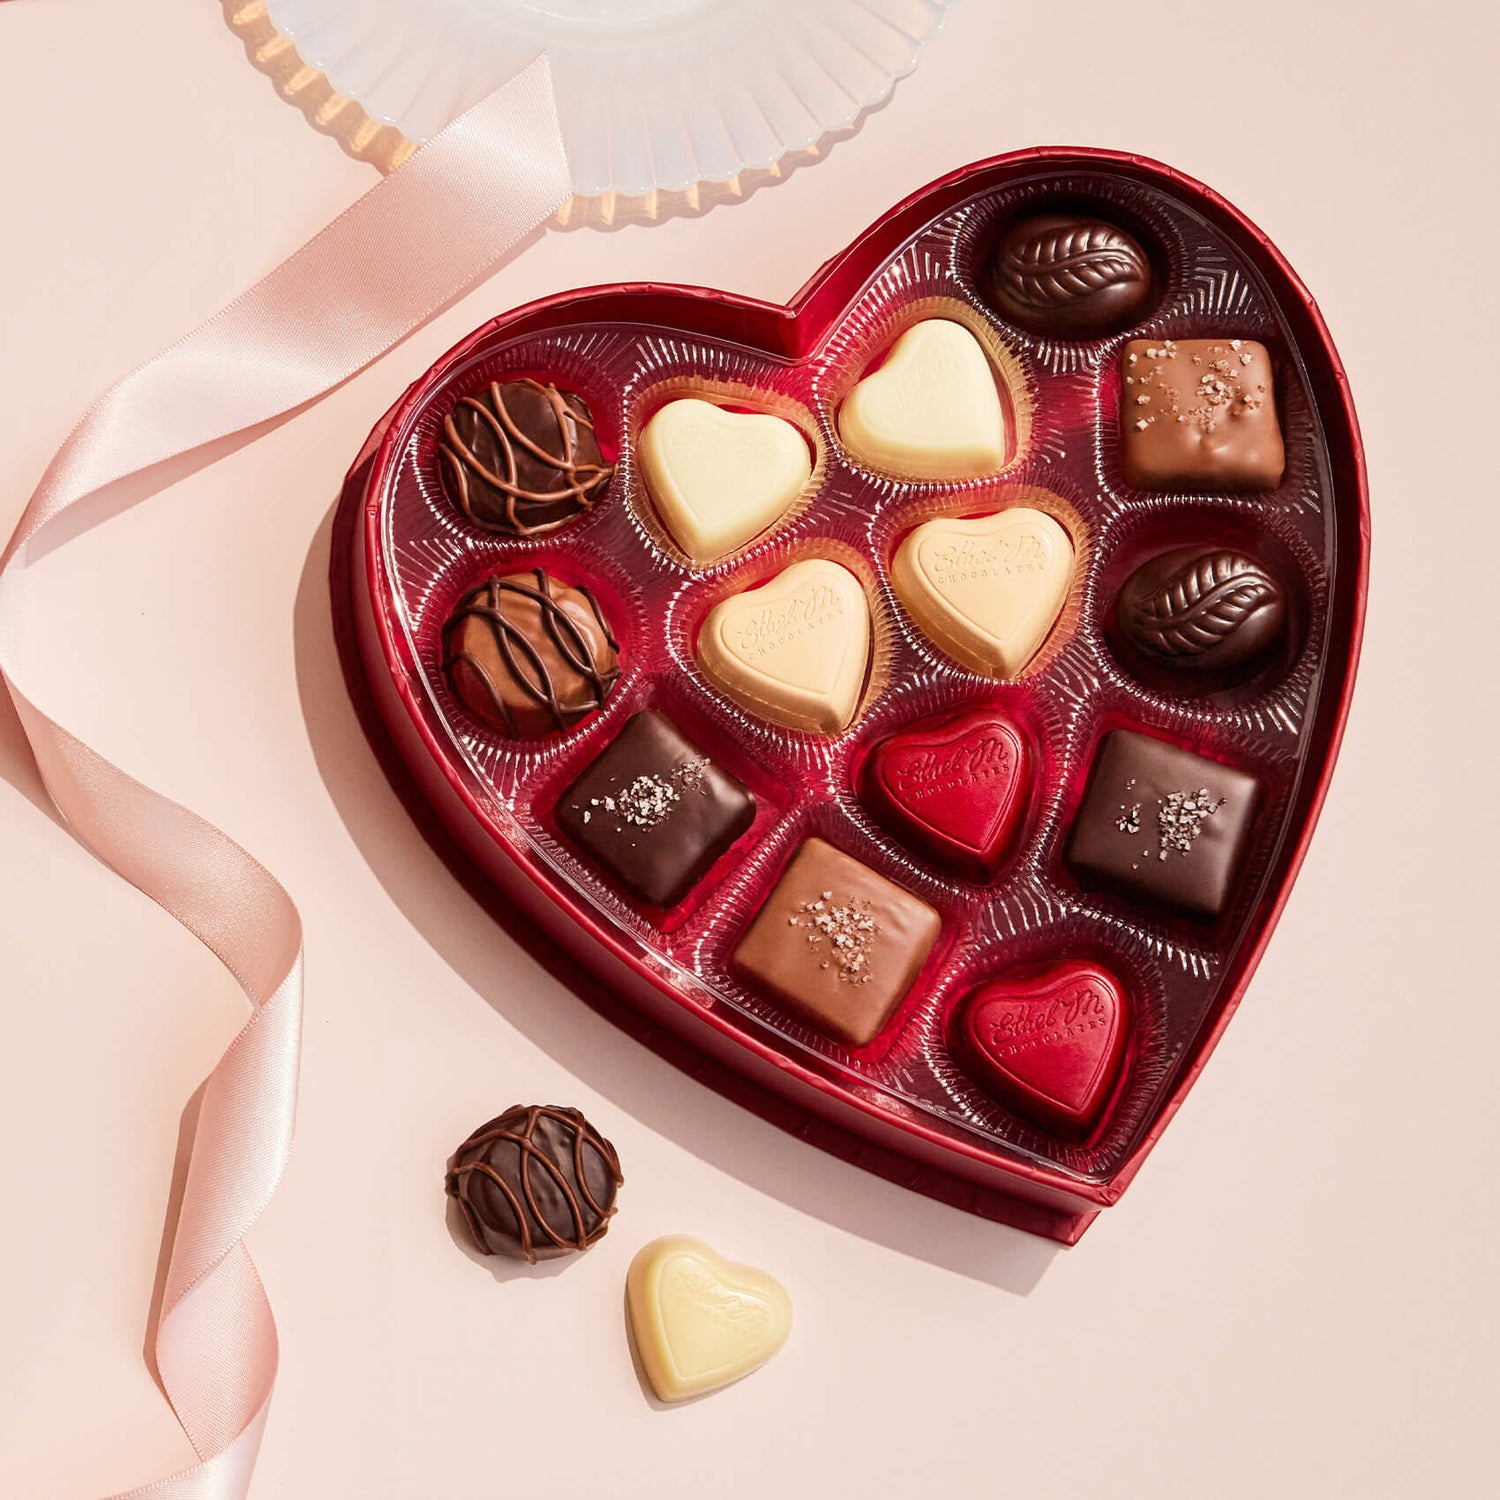 Buy/Send Valentines Day Special Chocolate Gifts Box Online